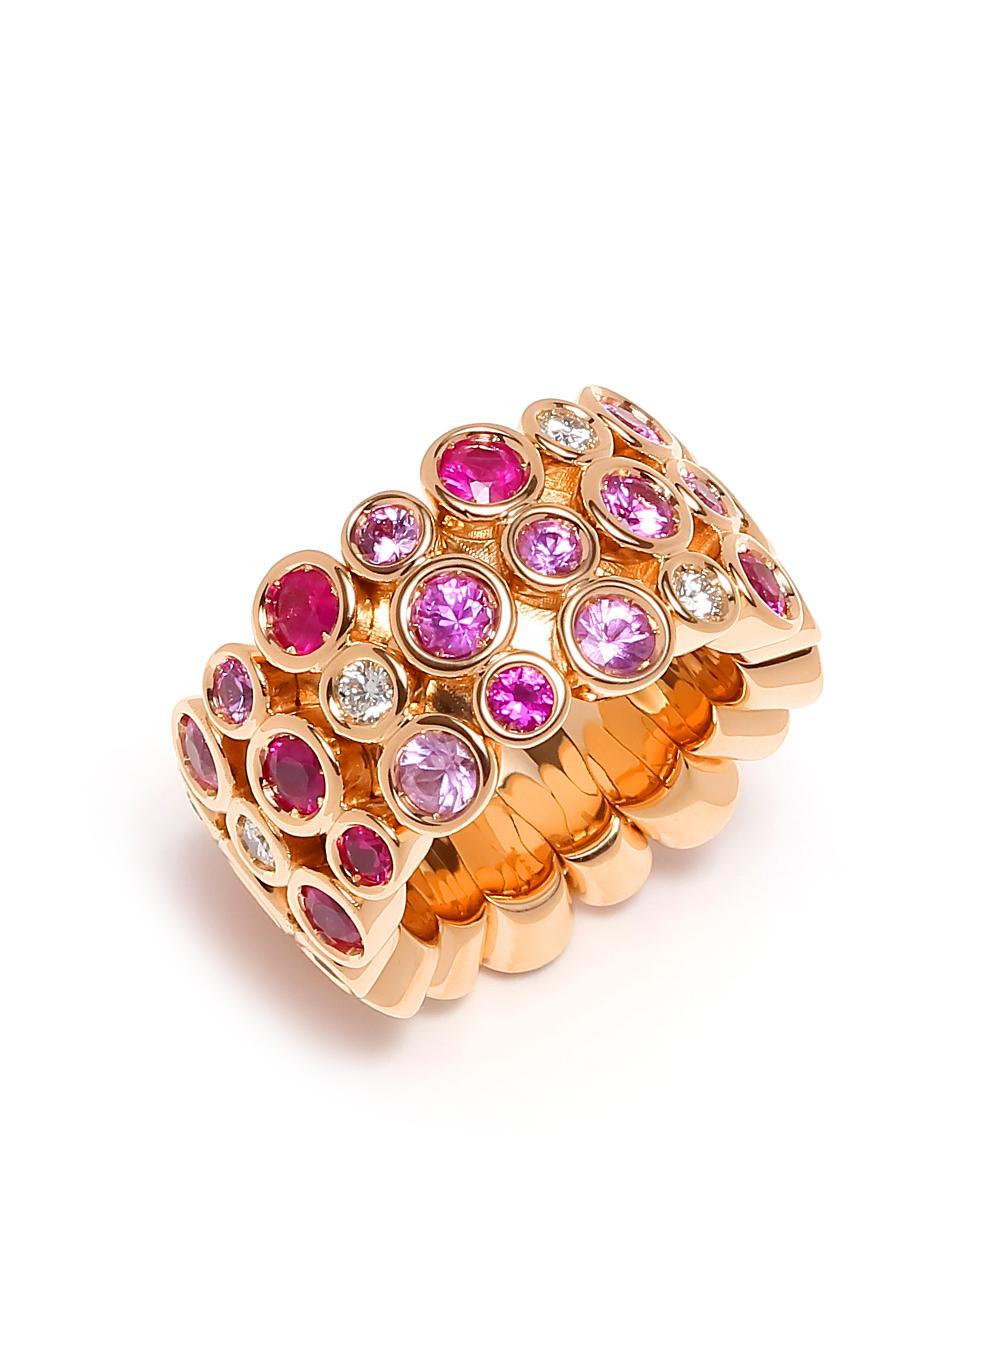 Multi Color Pink Ombre Eternity Patterns Ring

Purple Pink Rose Sapphire Diamond Bezel Eternity Band 18 Karat Rose Gold Ring

Jewels inspired by the colourful Art Deco movement. Lively designs and colorful Interpretations in a triple row eternity